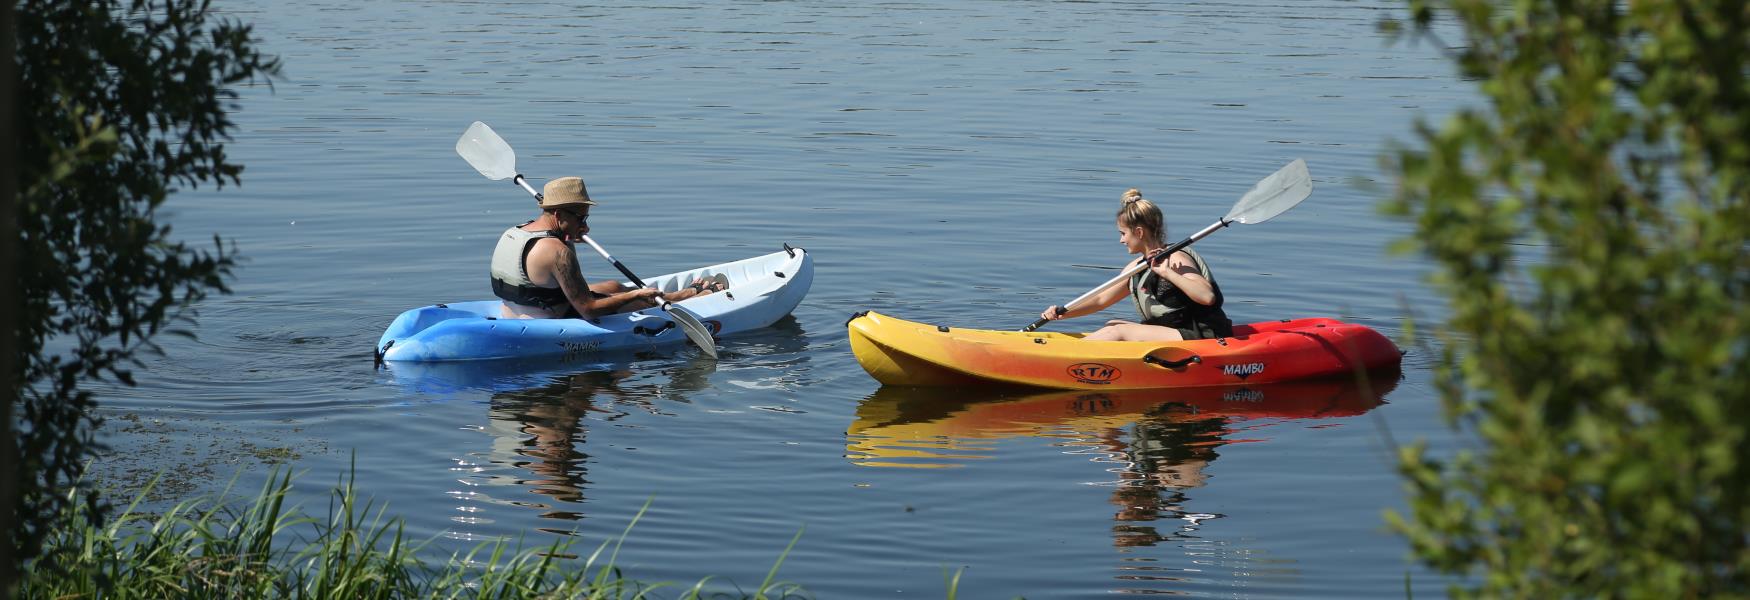 Two people kayaking at Ferry Meadows in Nene Park